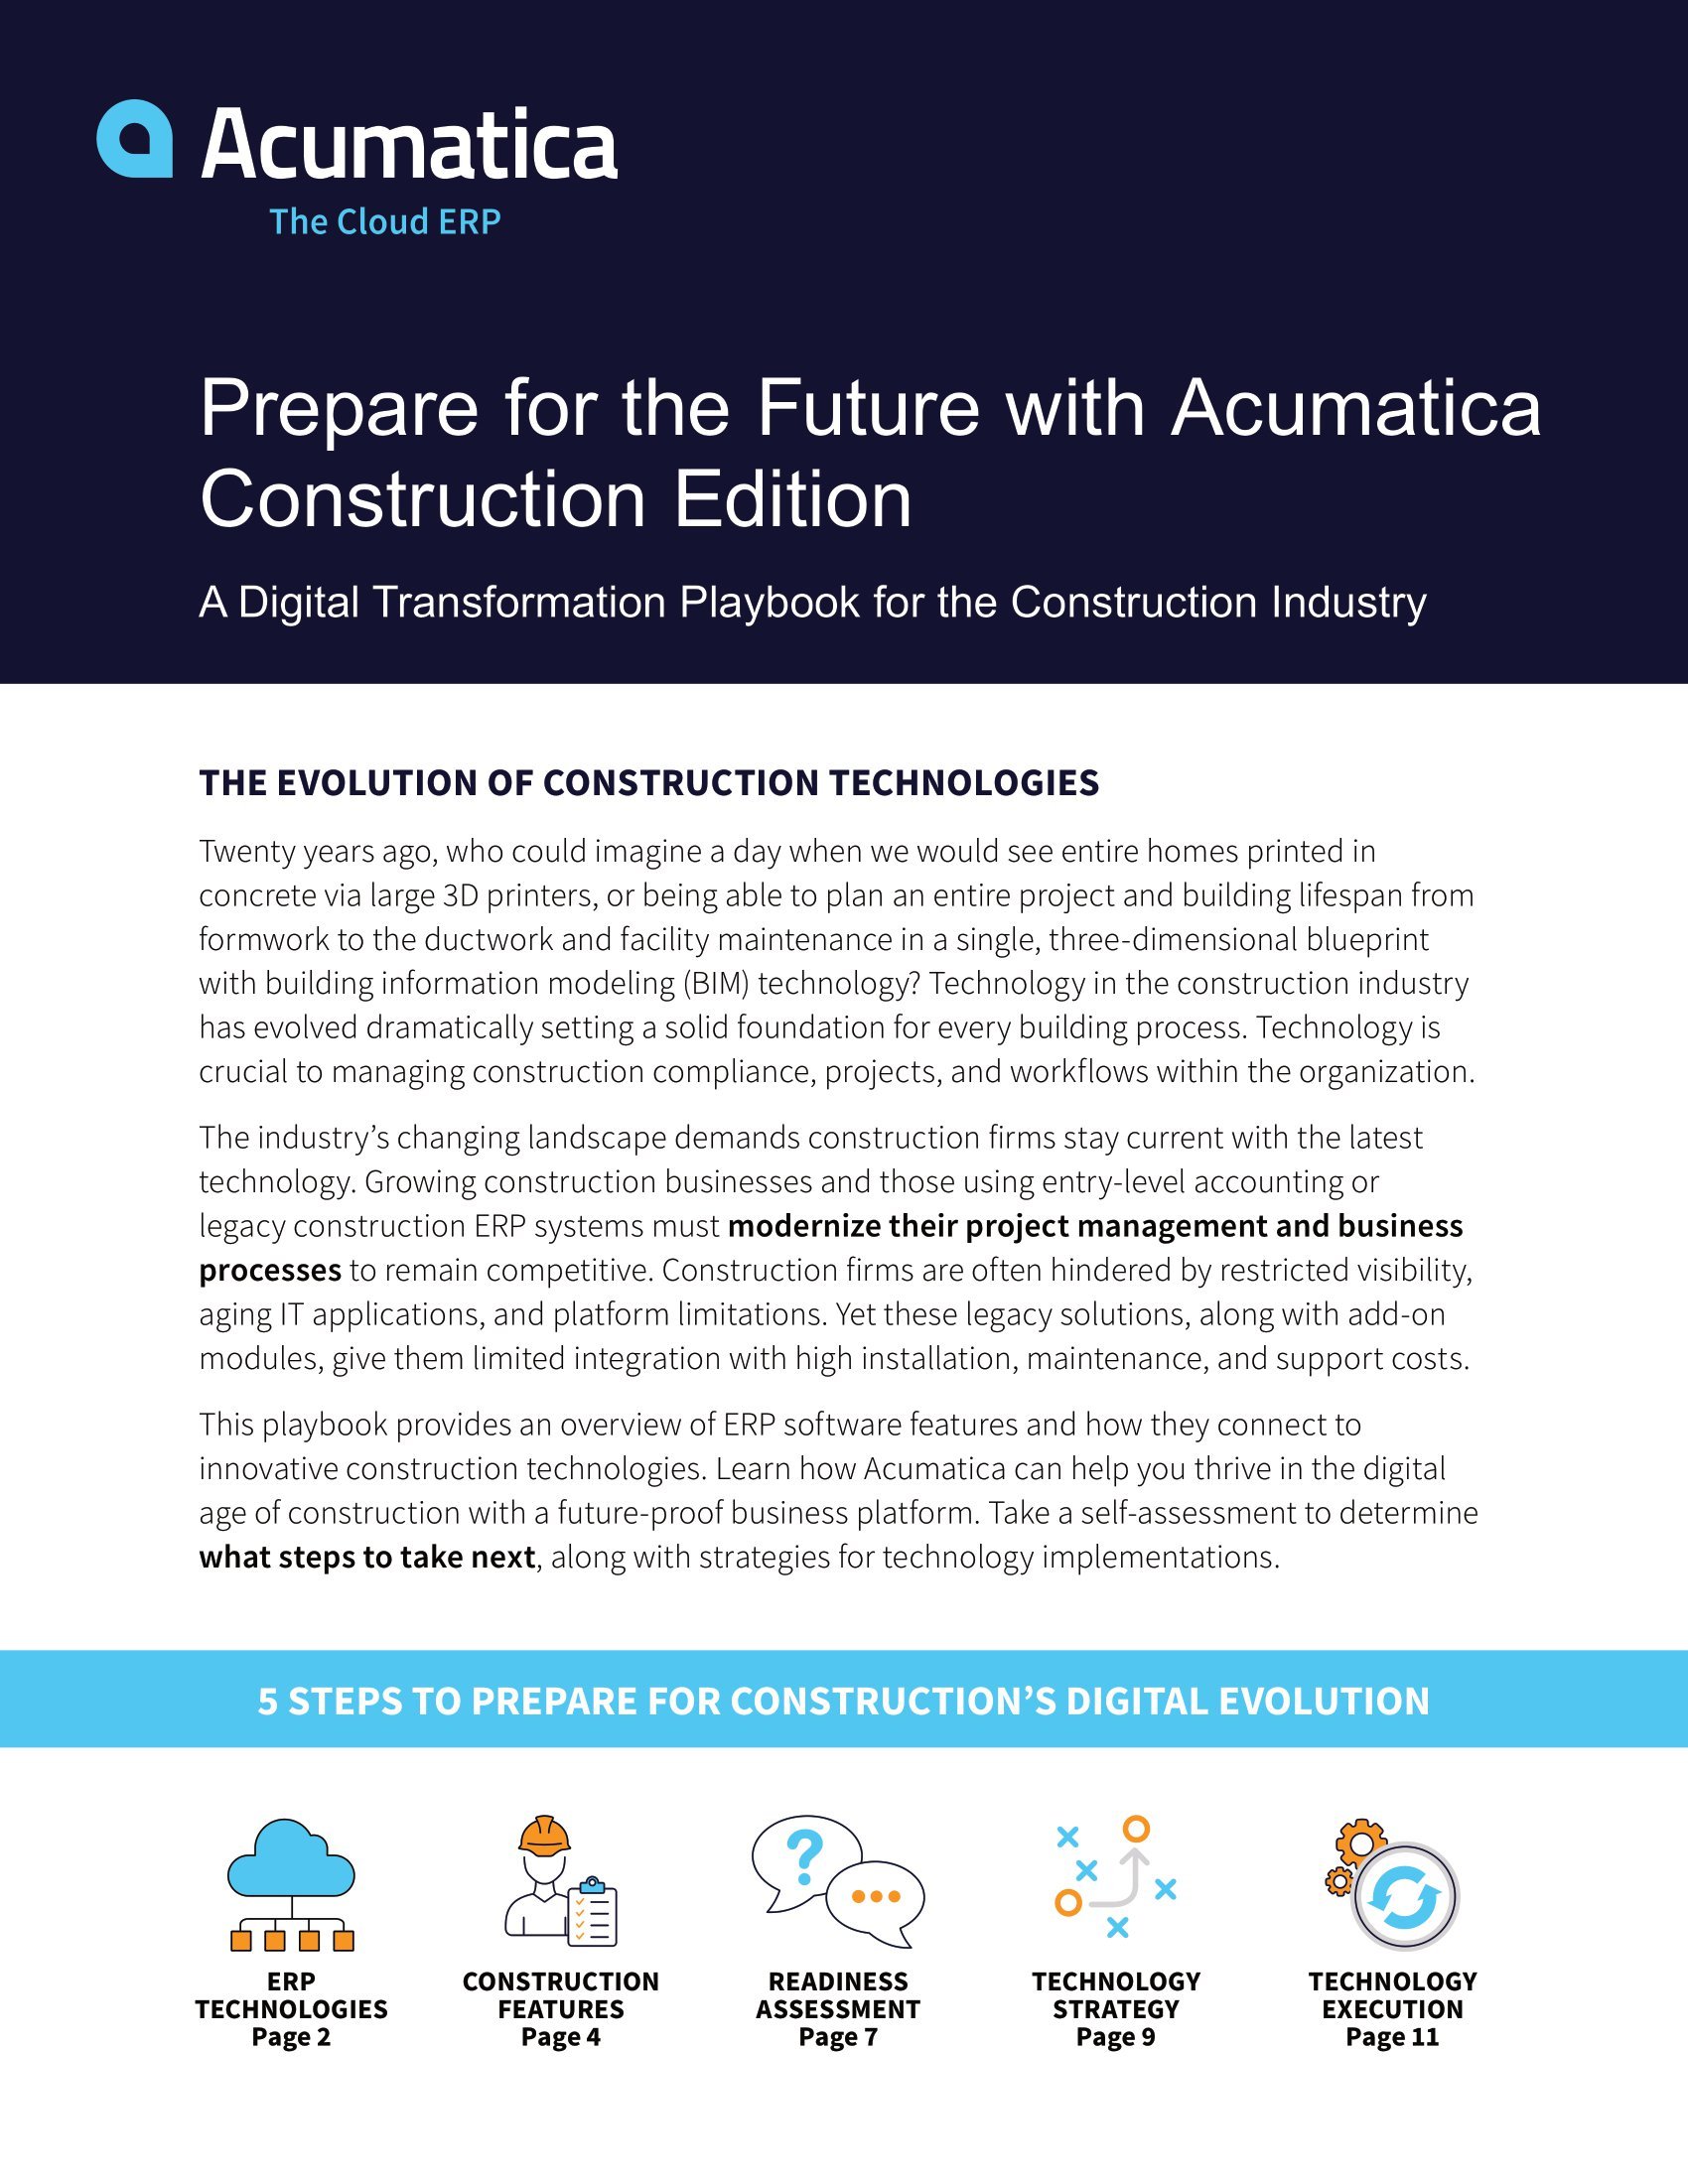 Prepare for the Construction Industry Evolution with a Digital Transformation, page 0